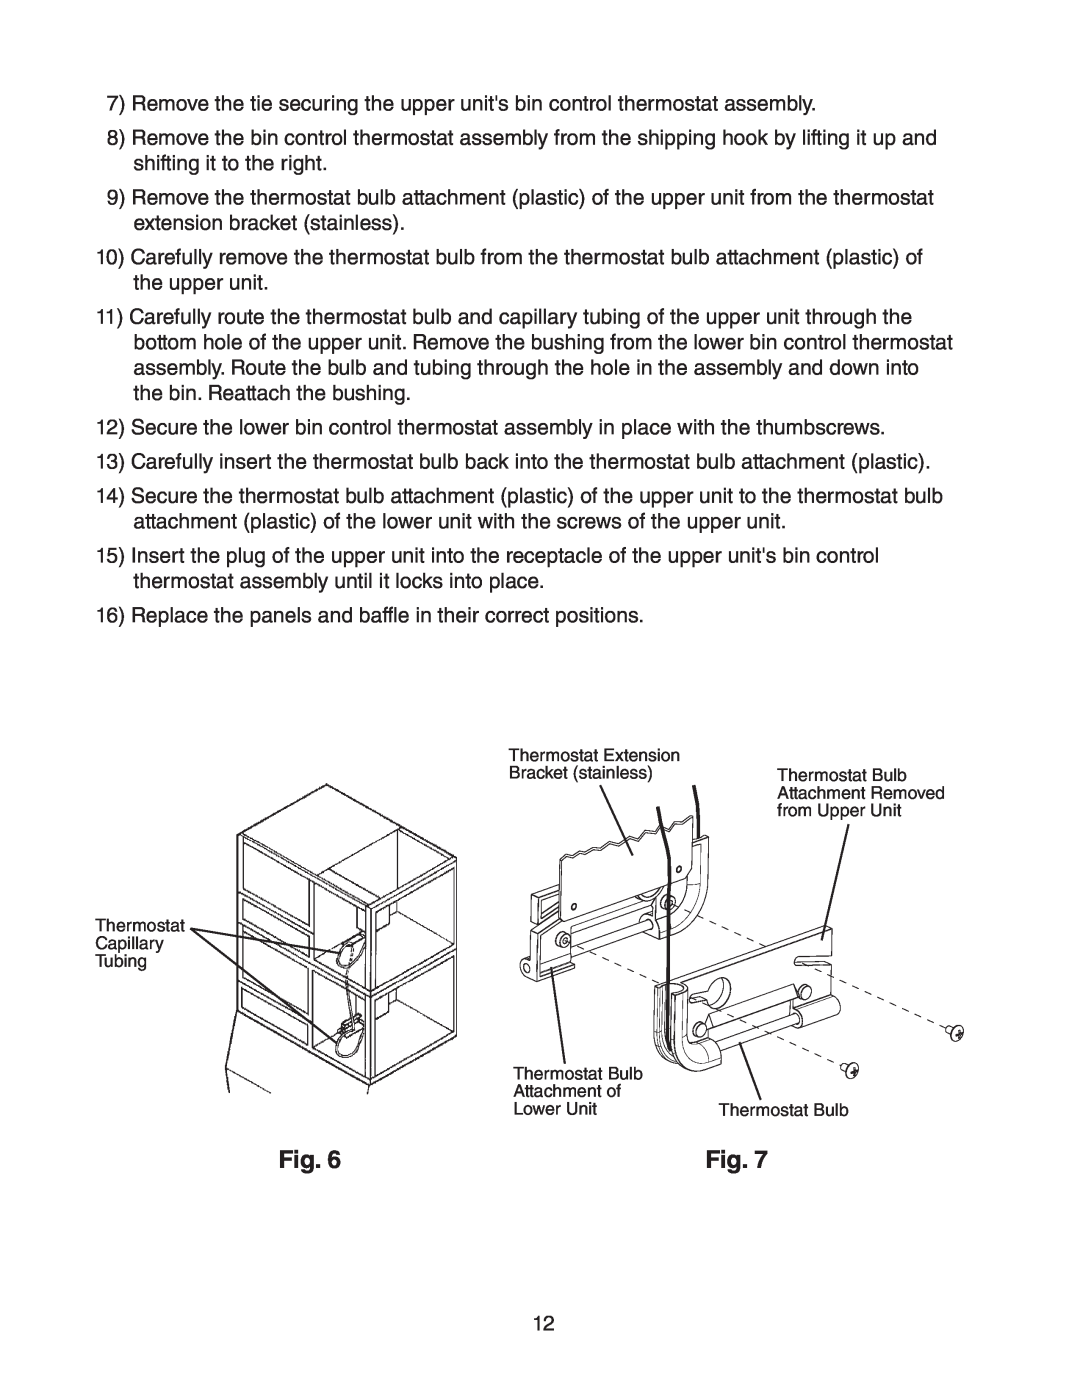 Hoshizaki KM-1400SWH/3-M instruction manual 7Remove the tie securing the upper units bin control thermostat assembly 